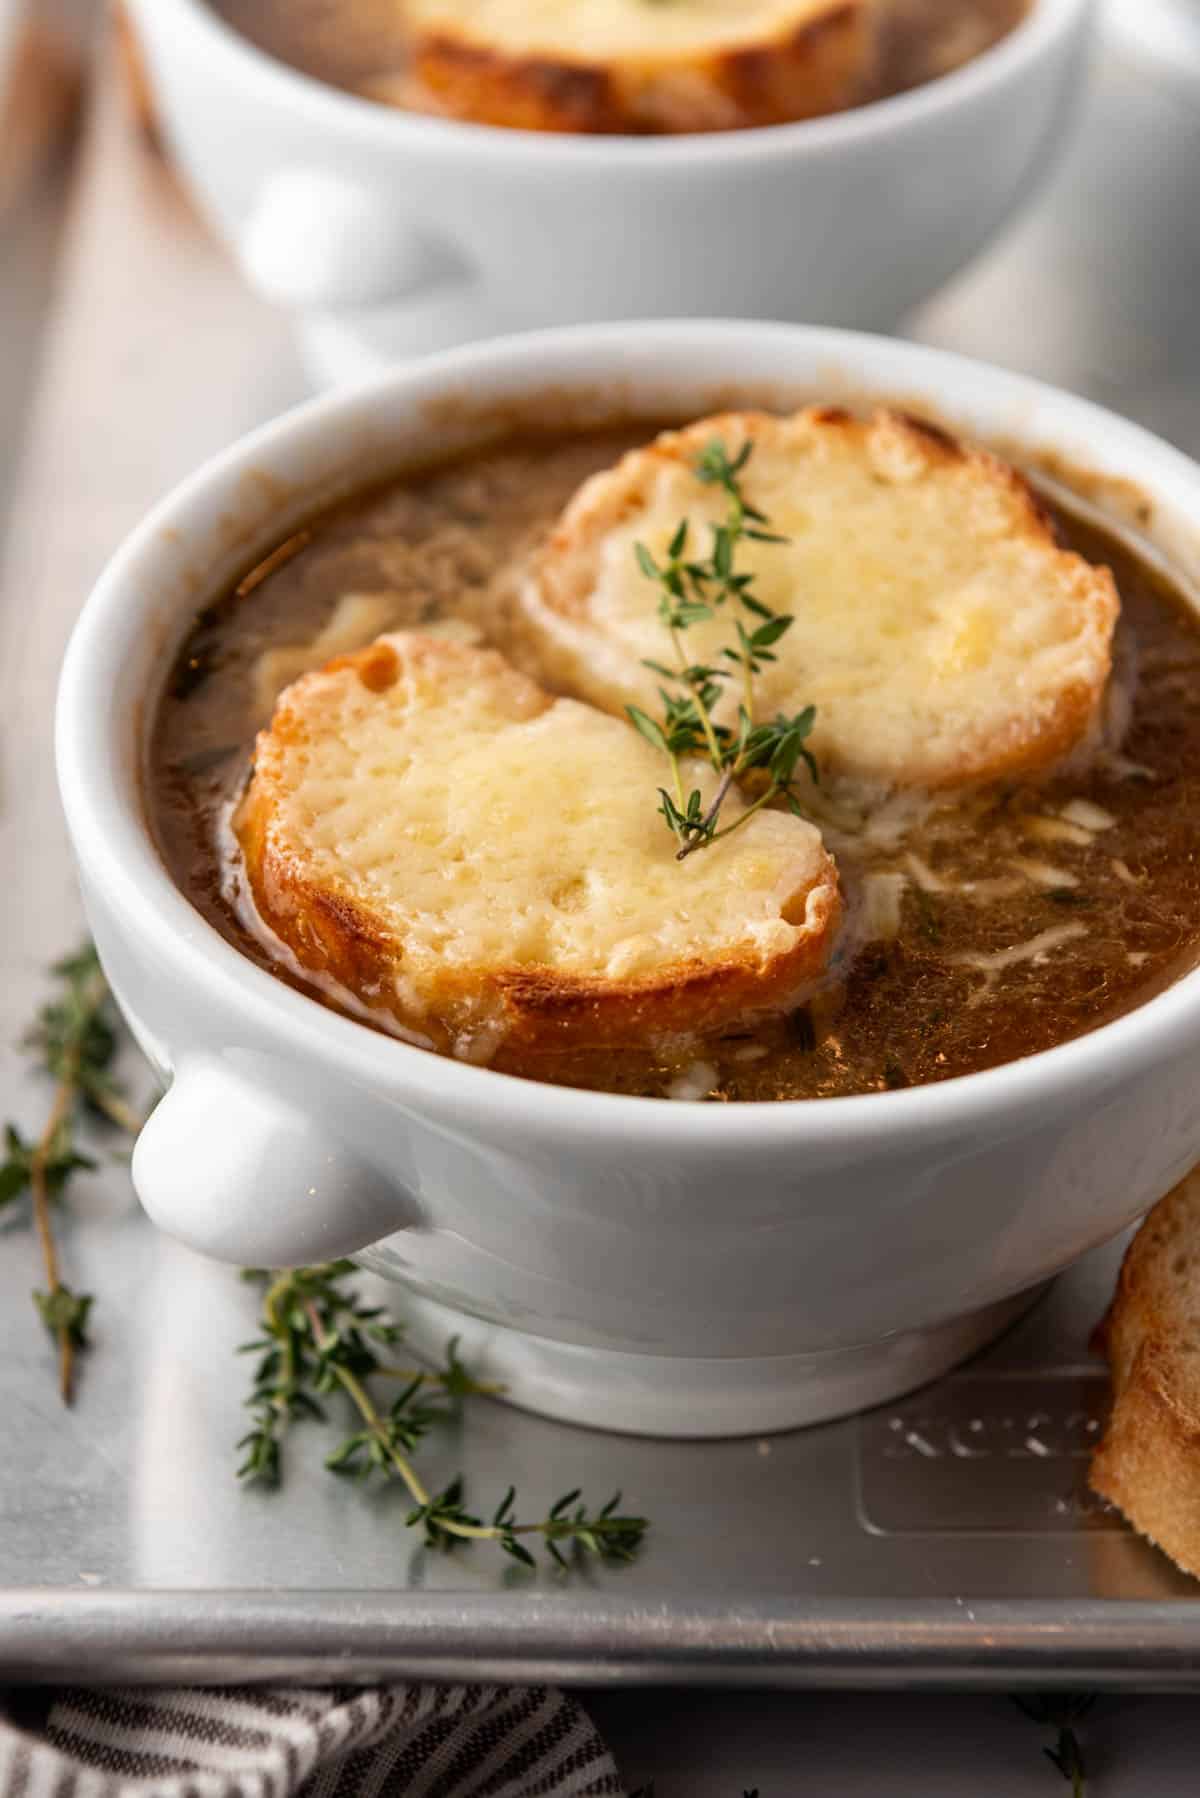 A side view of a white bowl of French onion soup.